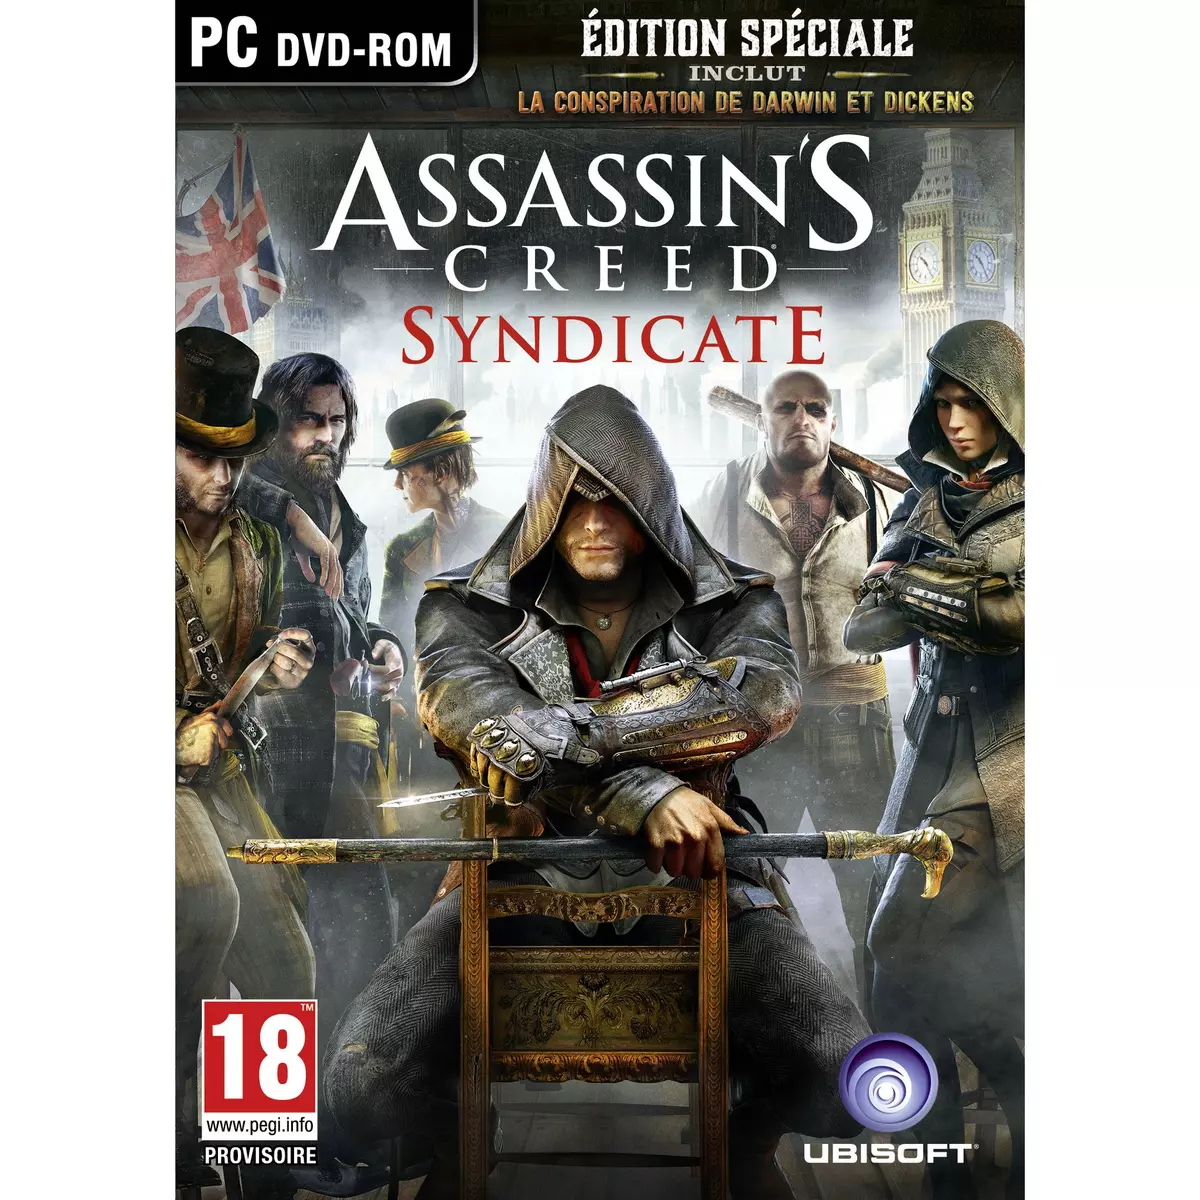 Assassin's Creed Syndicate PC - Edition Spéciale